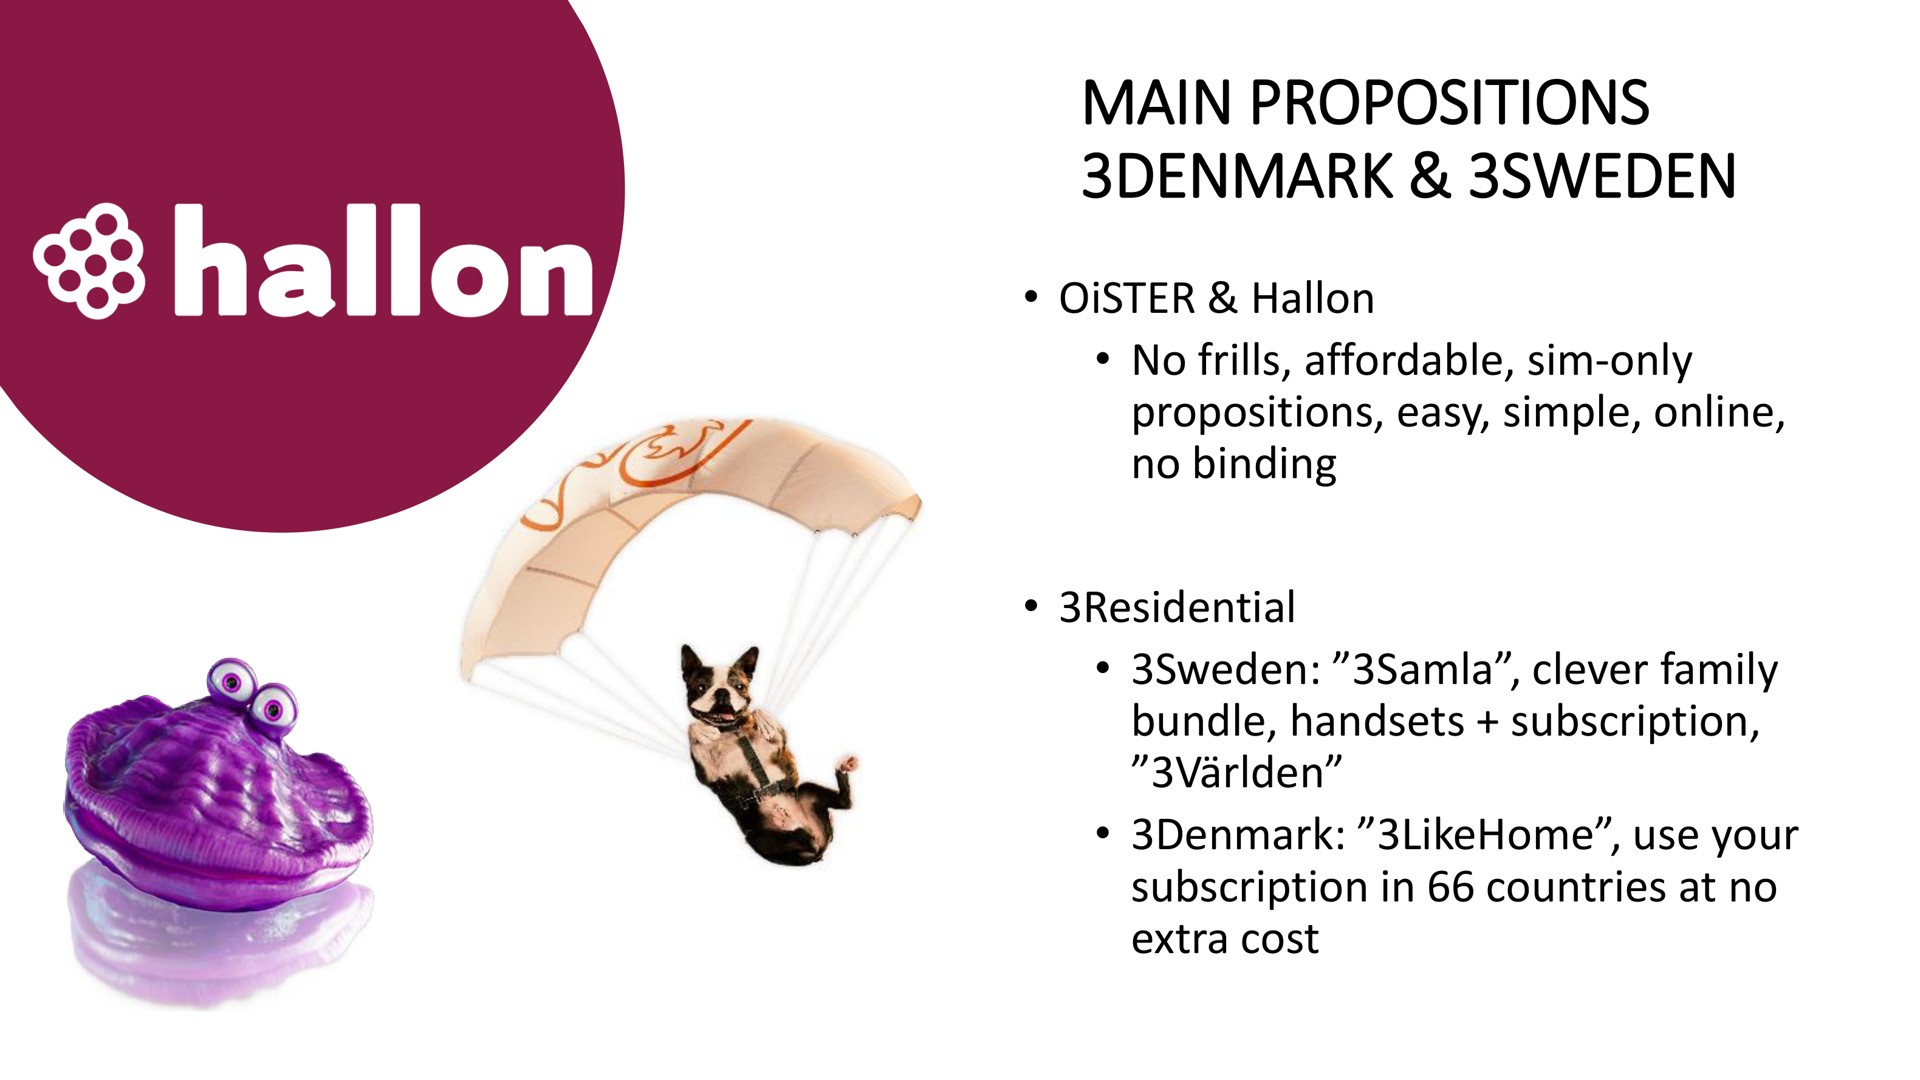 main propositions | Investor AB